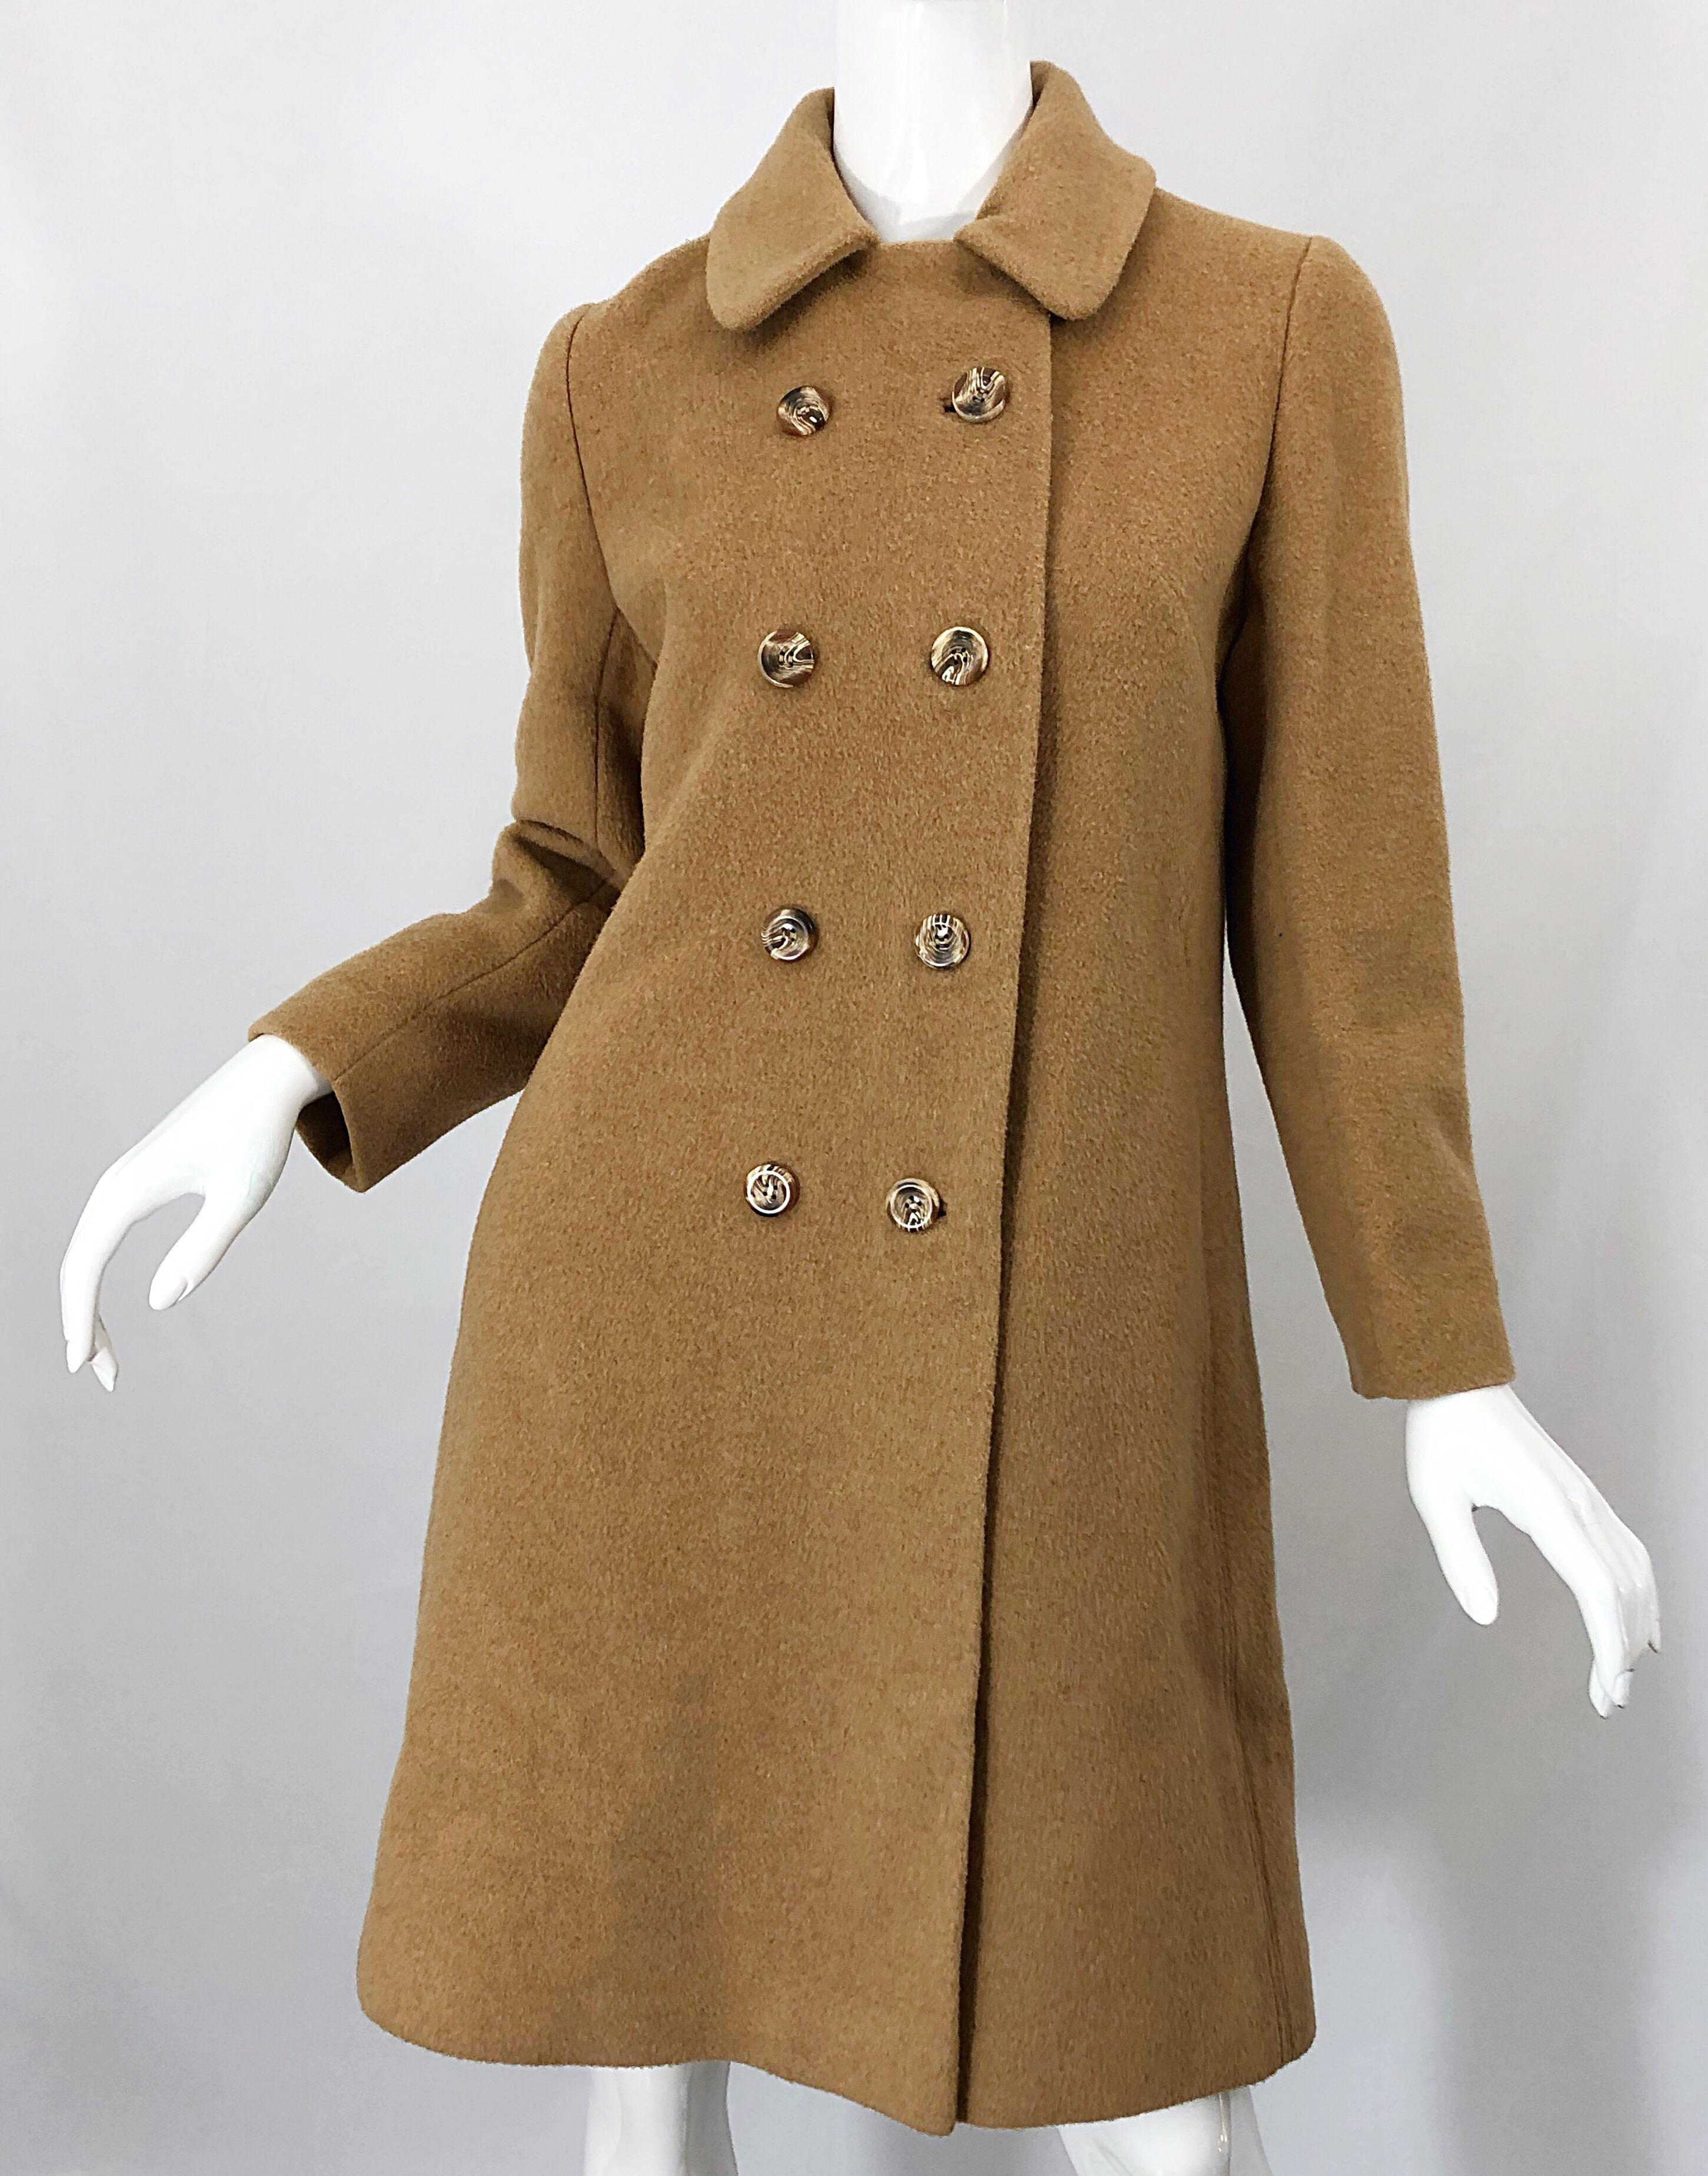 Chic 1960s Camel Tan Camels Hair Wool Double Breasted Vintage Swing Jacket Coat 1